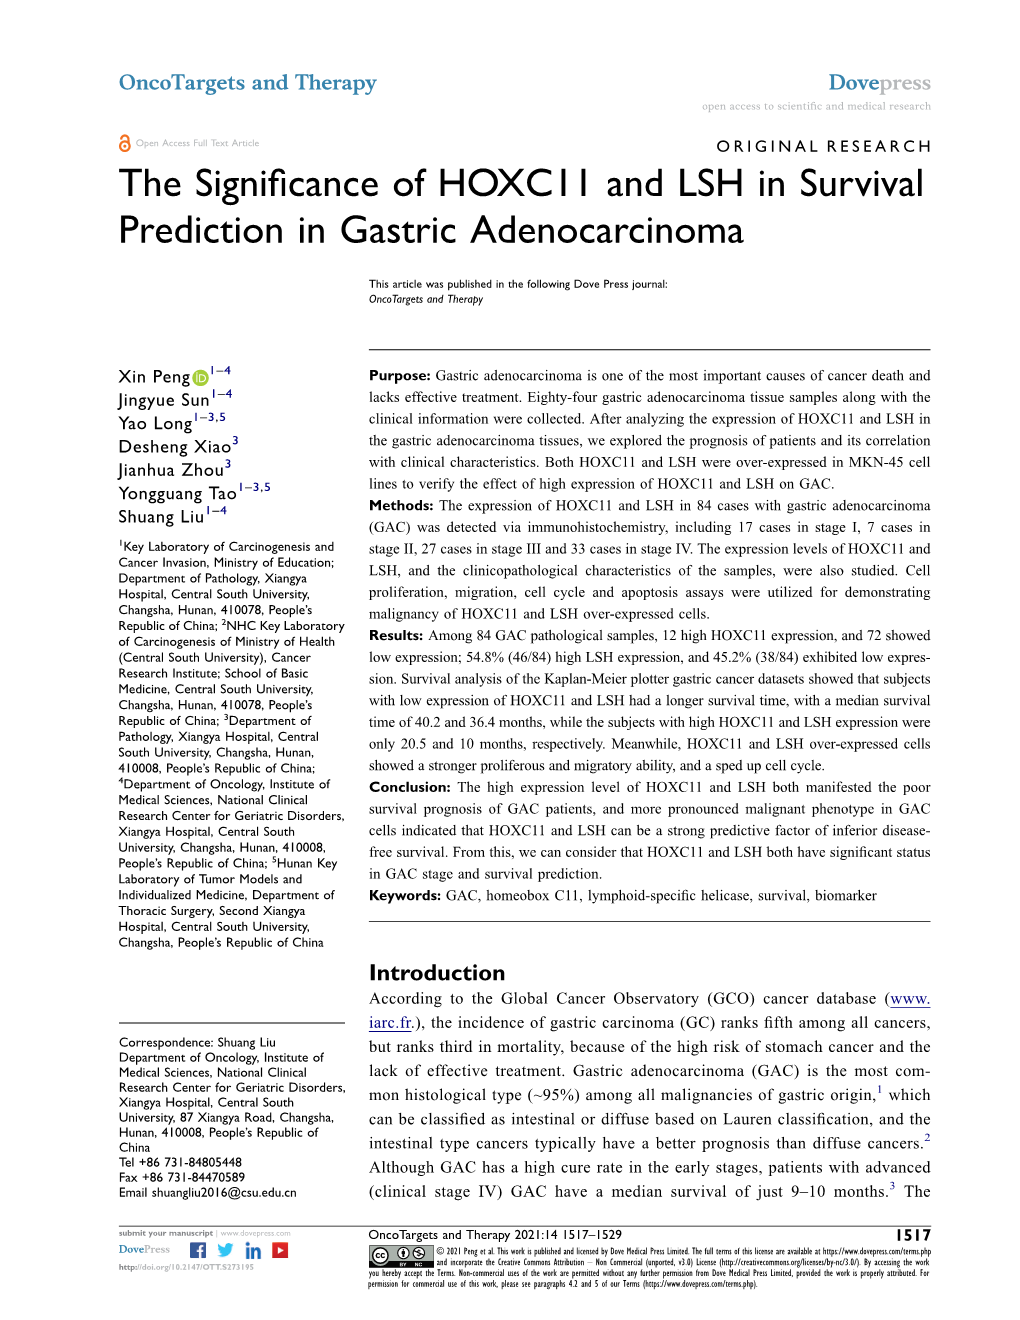 The Significance of HOXC11 and LSH in Survival Prediction in Gastric Adenocarcinoma